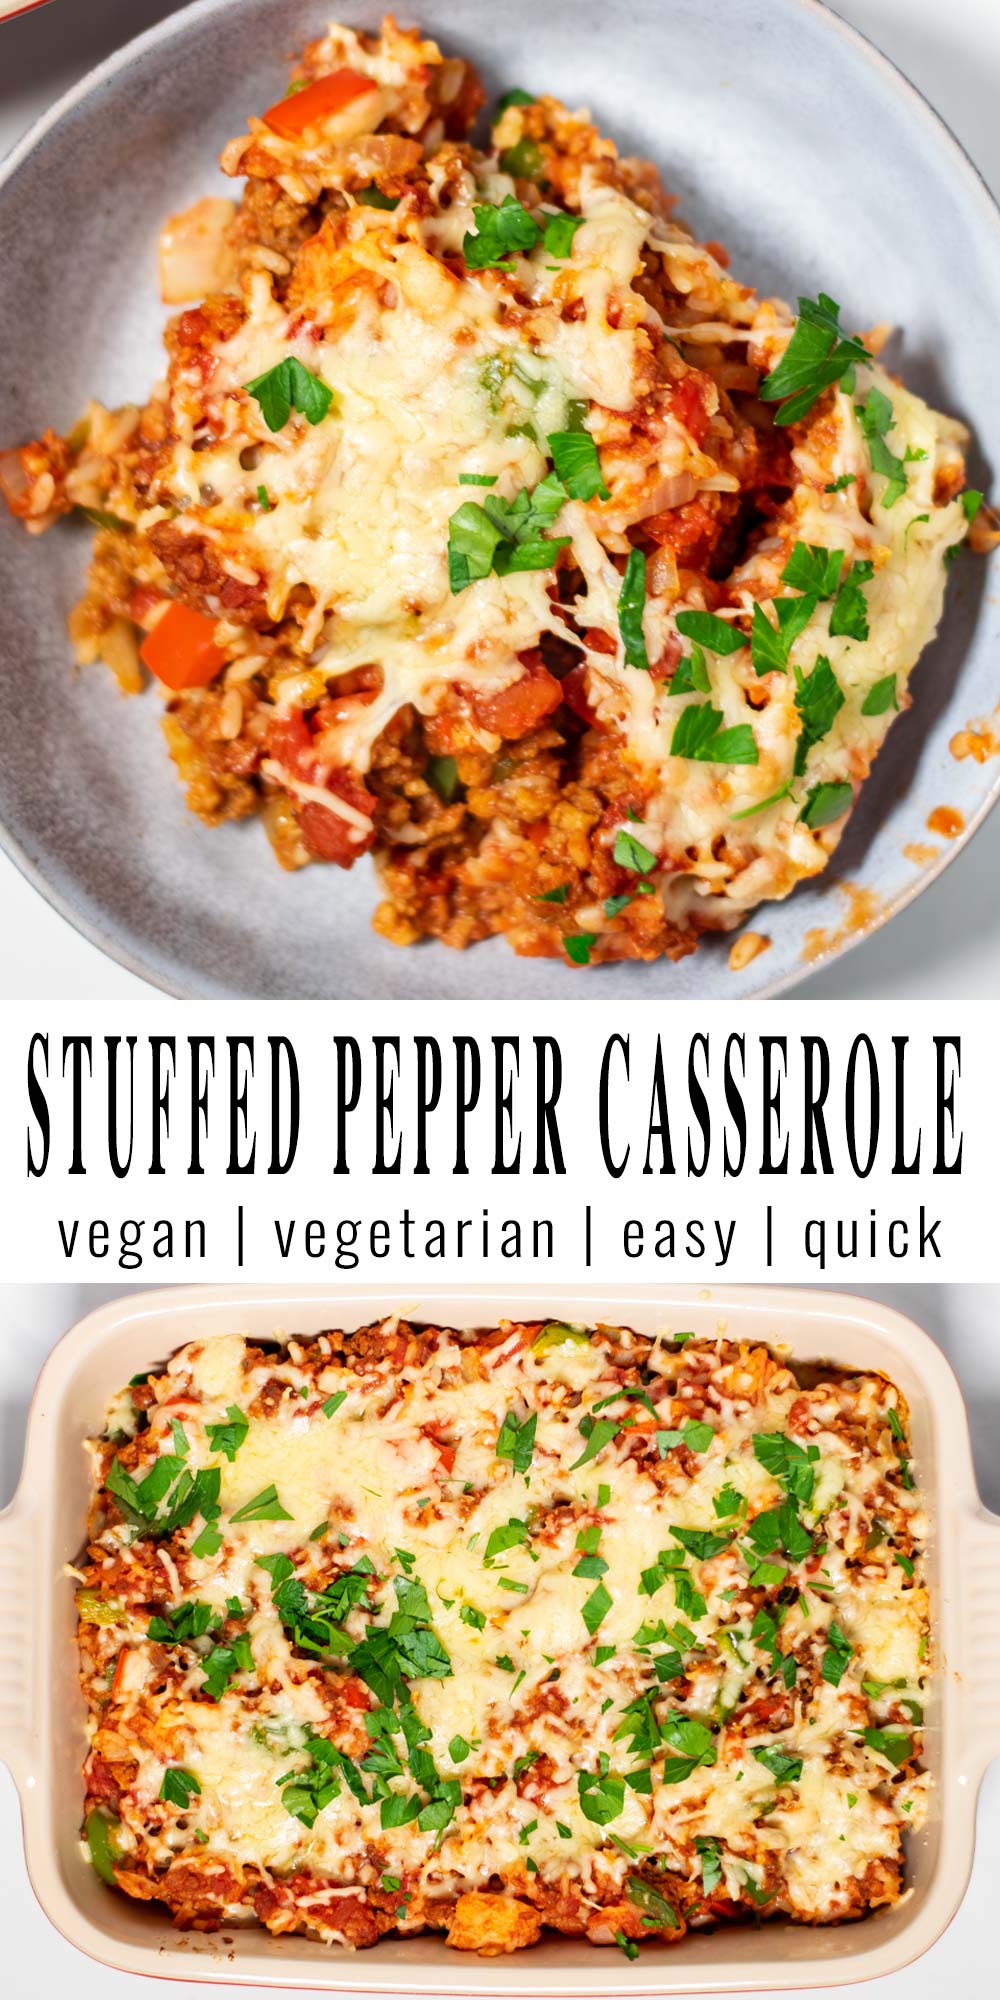 Collage of two pictures of the Stuffed Pepper Casserole with recipe title text.